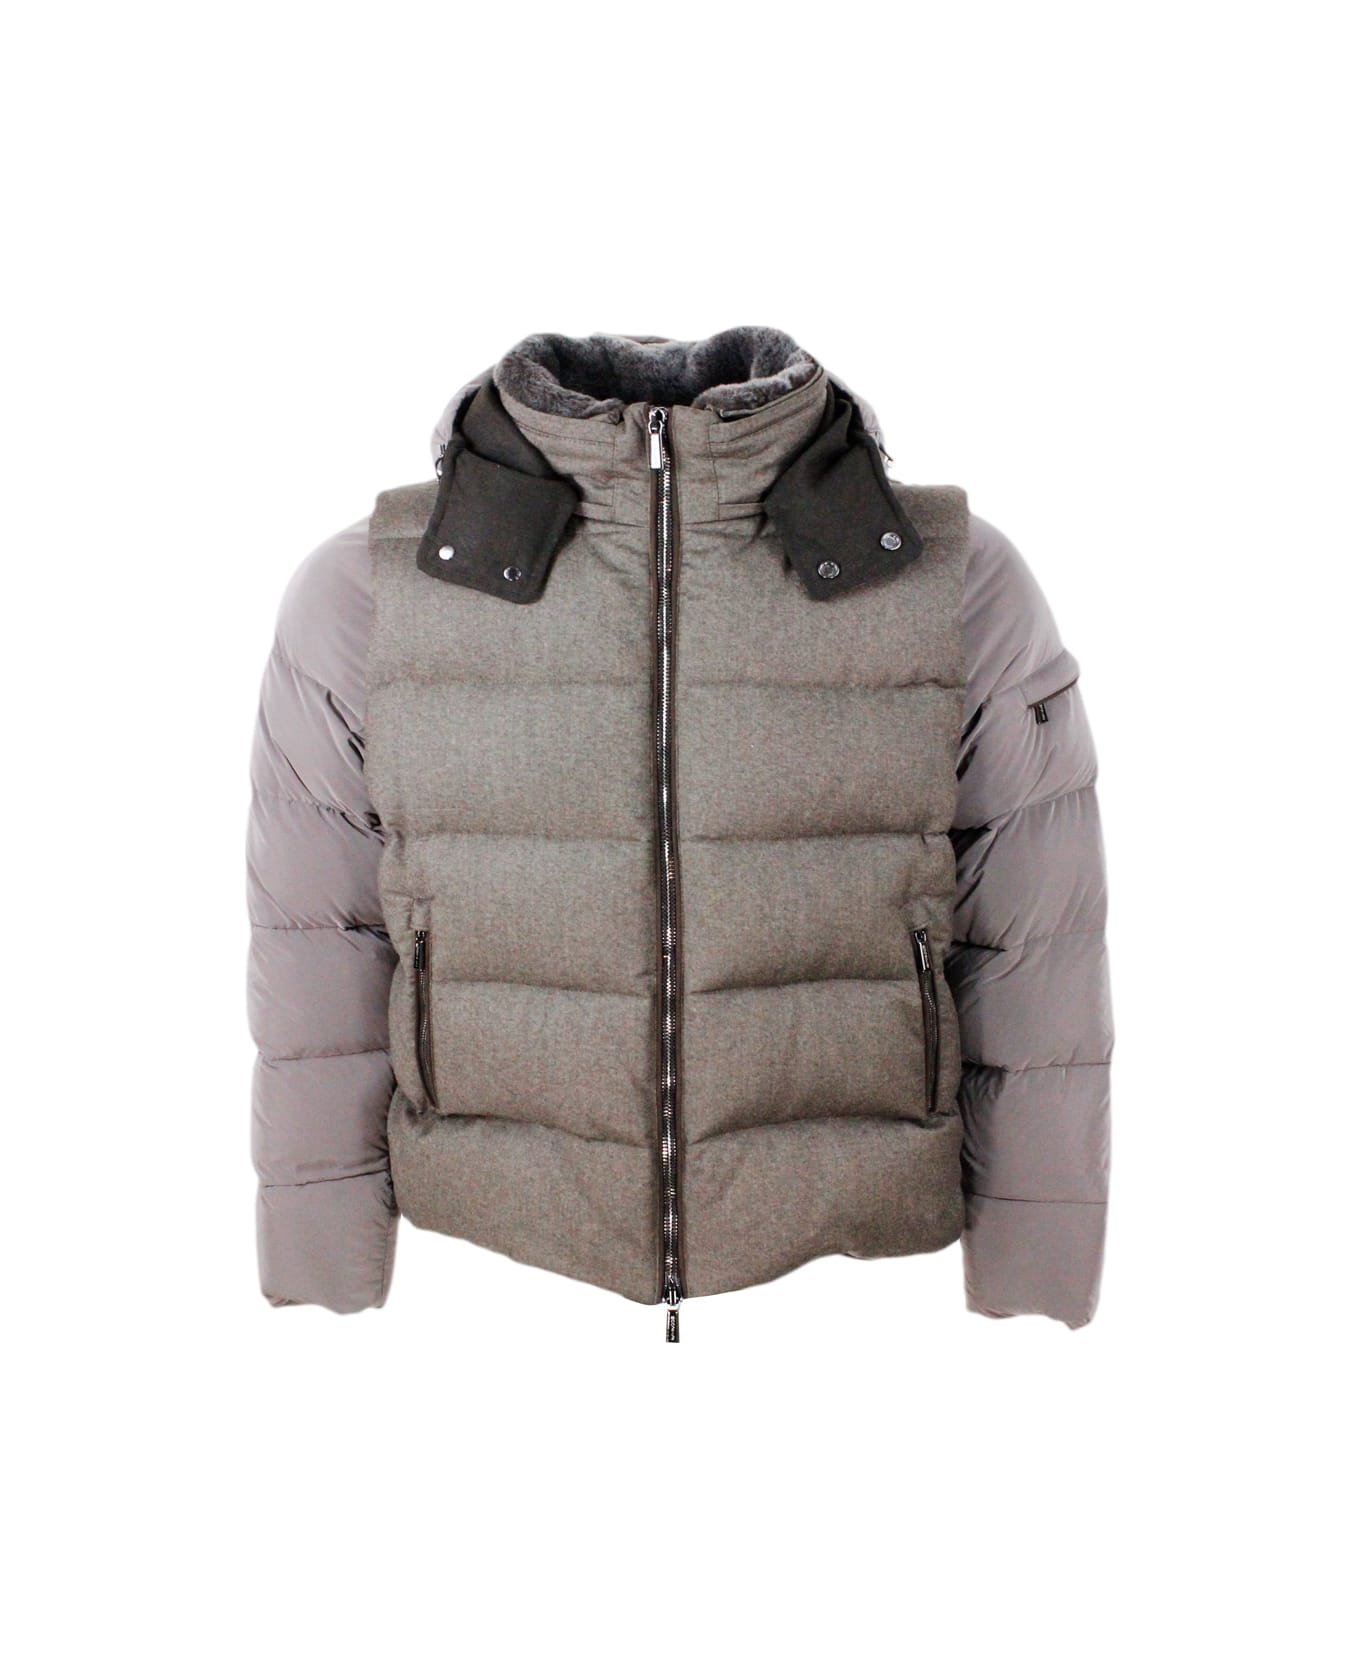 Moorer Bomber Down Jacket Made Of Fine Wool And Cashmere Flannel And Nylon Sleeves. Goose Down Padding. Collar With Detachable Fur And Hood - Cacao